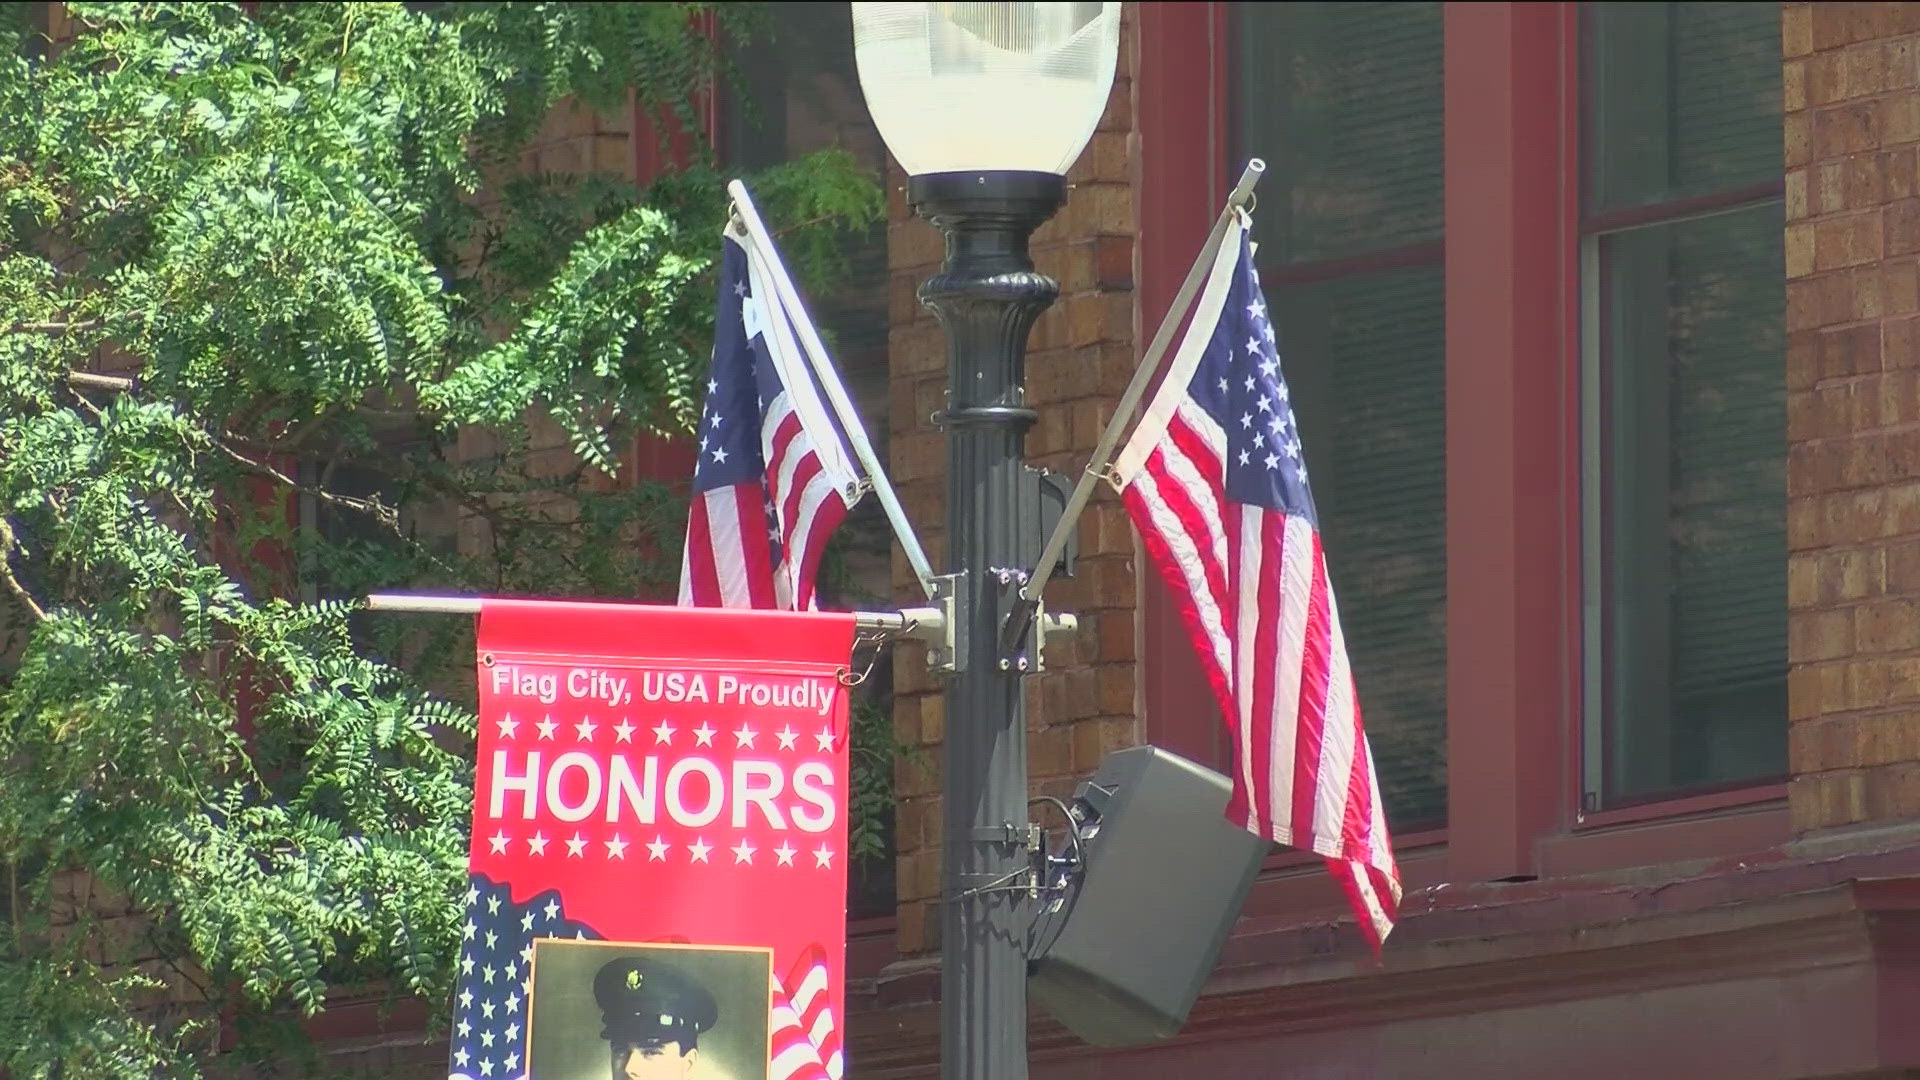 It all began with one man and 14,000 flags in Findlay on Flag Day in 1968.